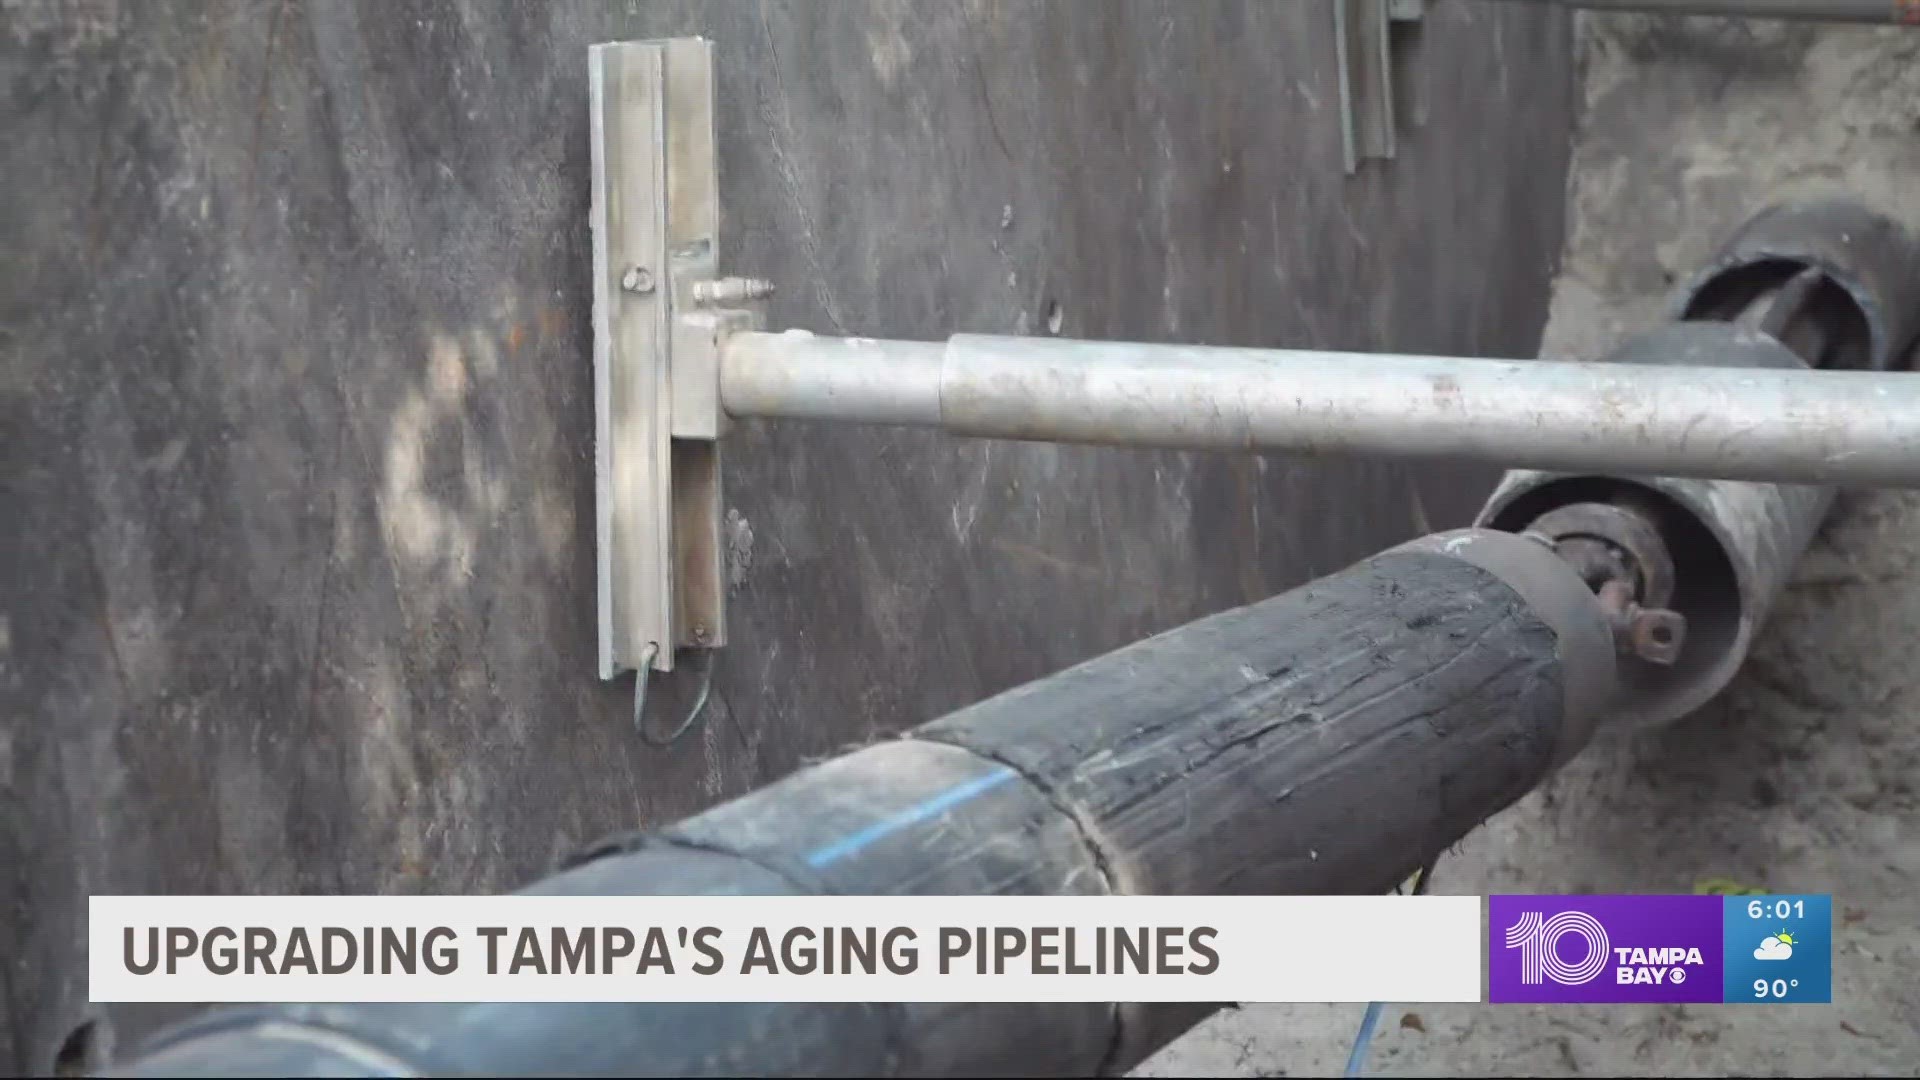 From low water pressure to broken pipes, you've likely felt the impact of Tampa's aging water system. Now, the city is improving its decades-old infrastructure.